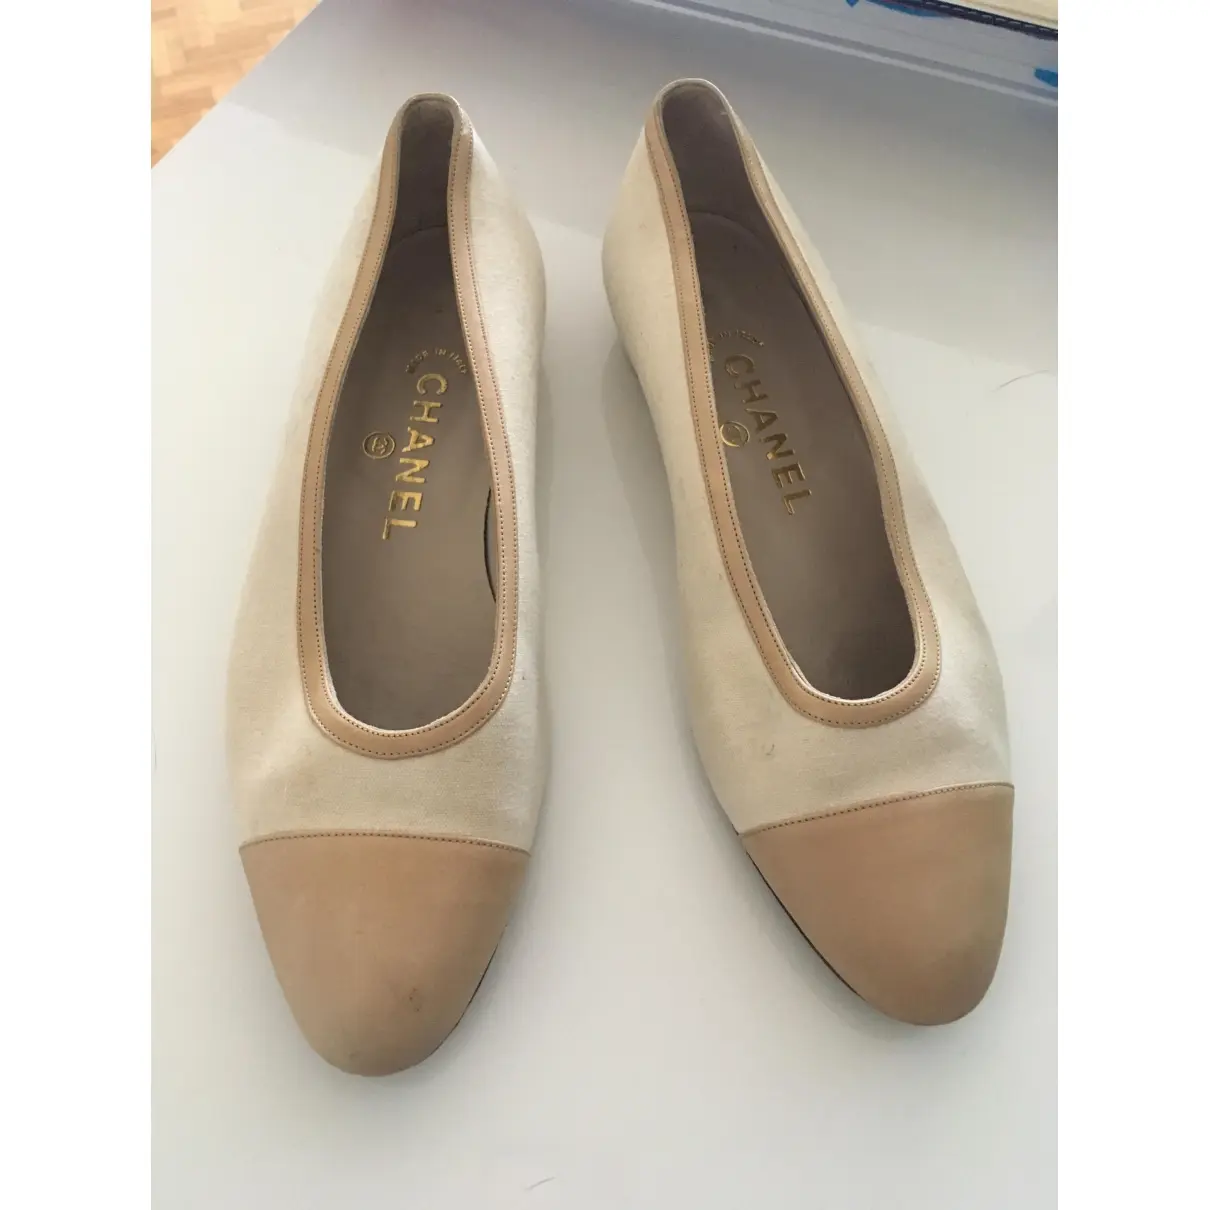 Chanel Cambon cloth ballet flats for sale - Vintage